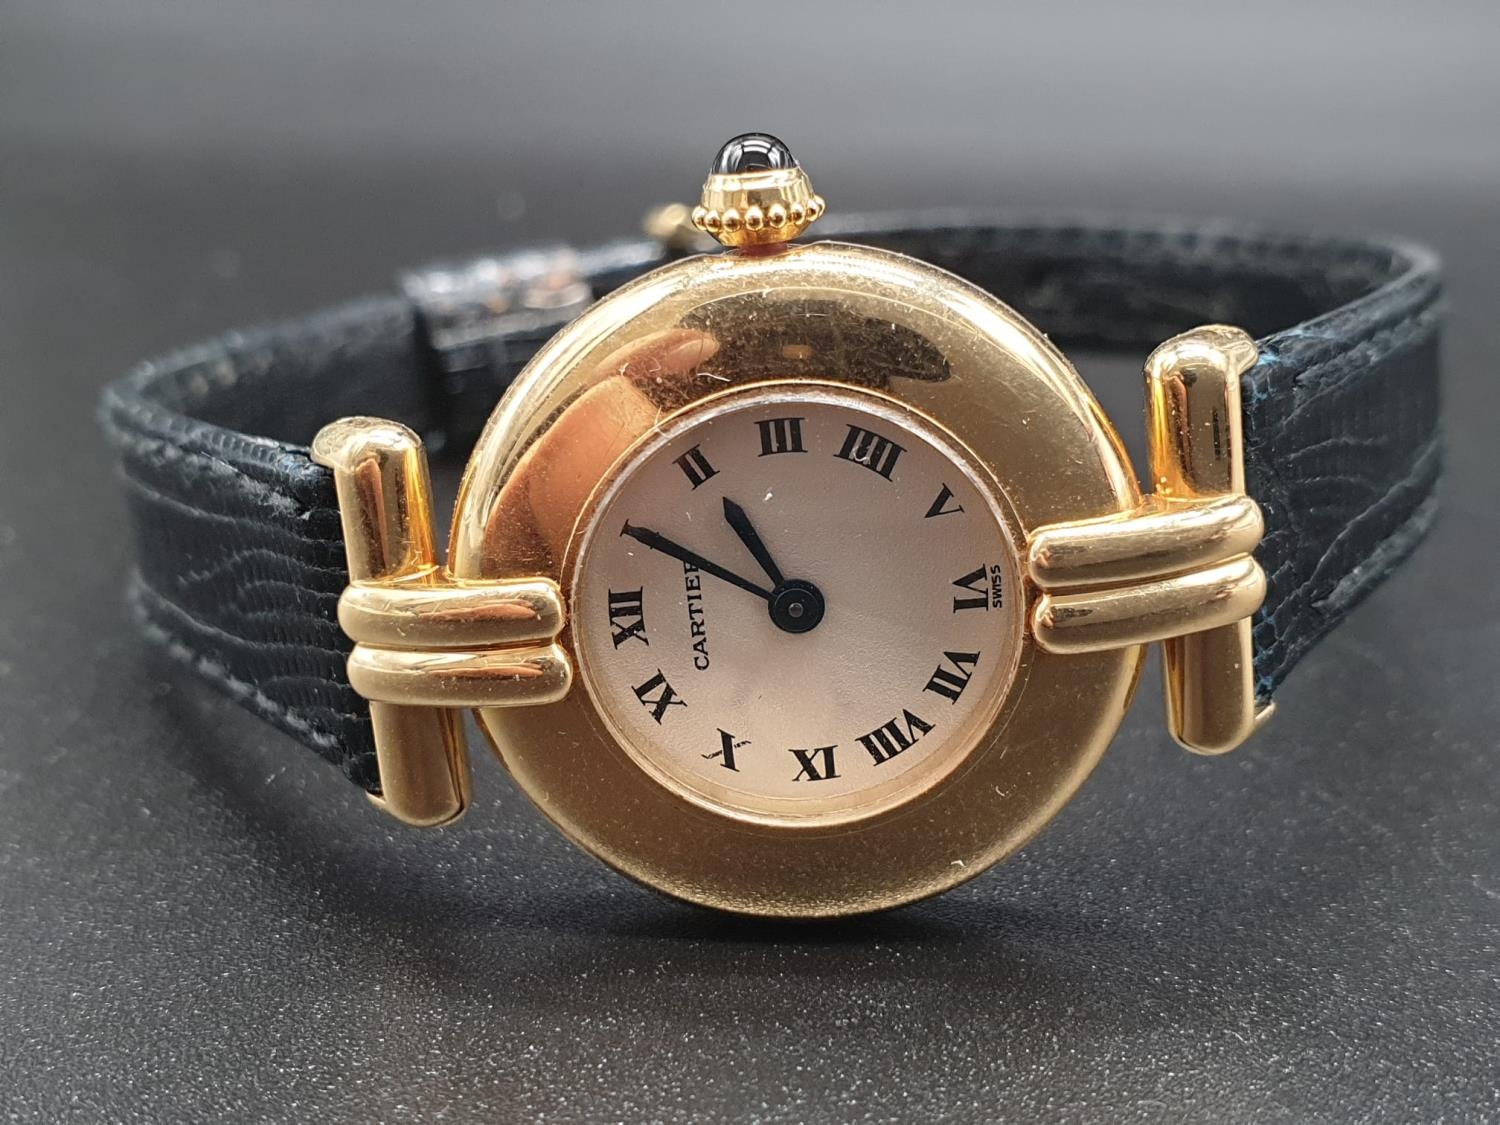 18k yellow gold Cartier quartz ladies watch, white round face and black leather strap - Image 4 of 8